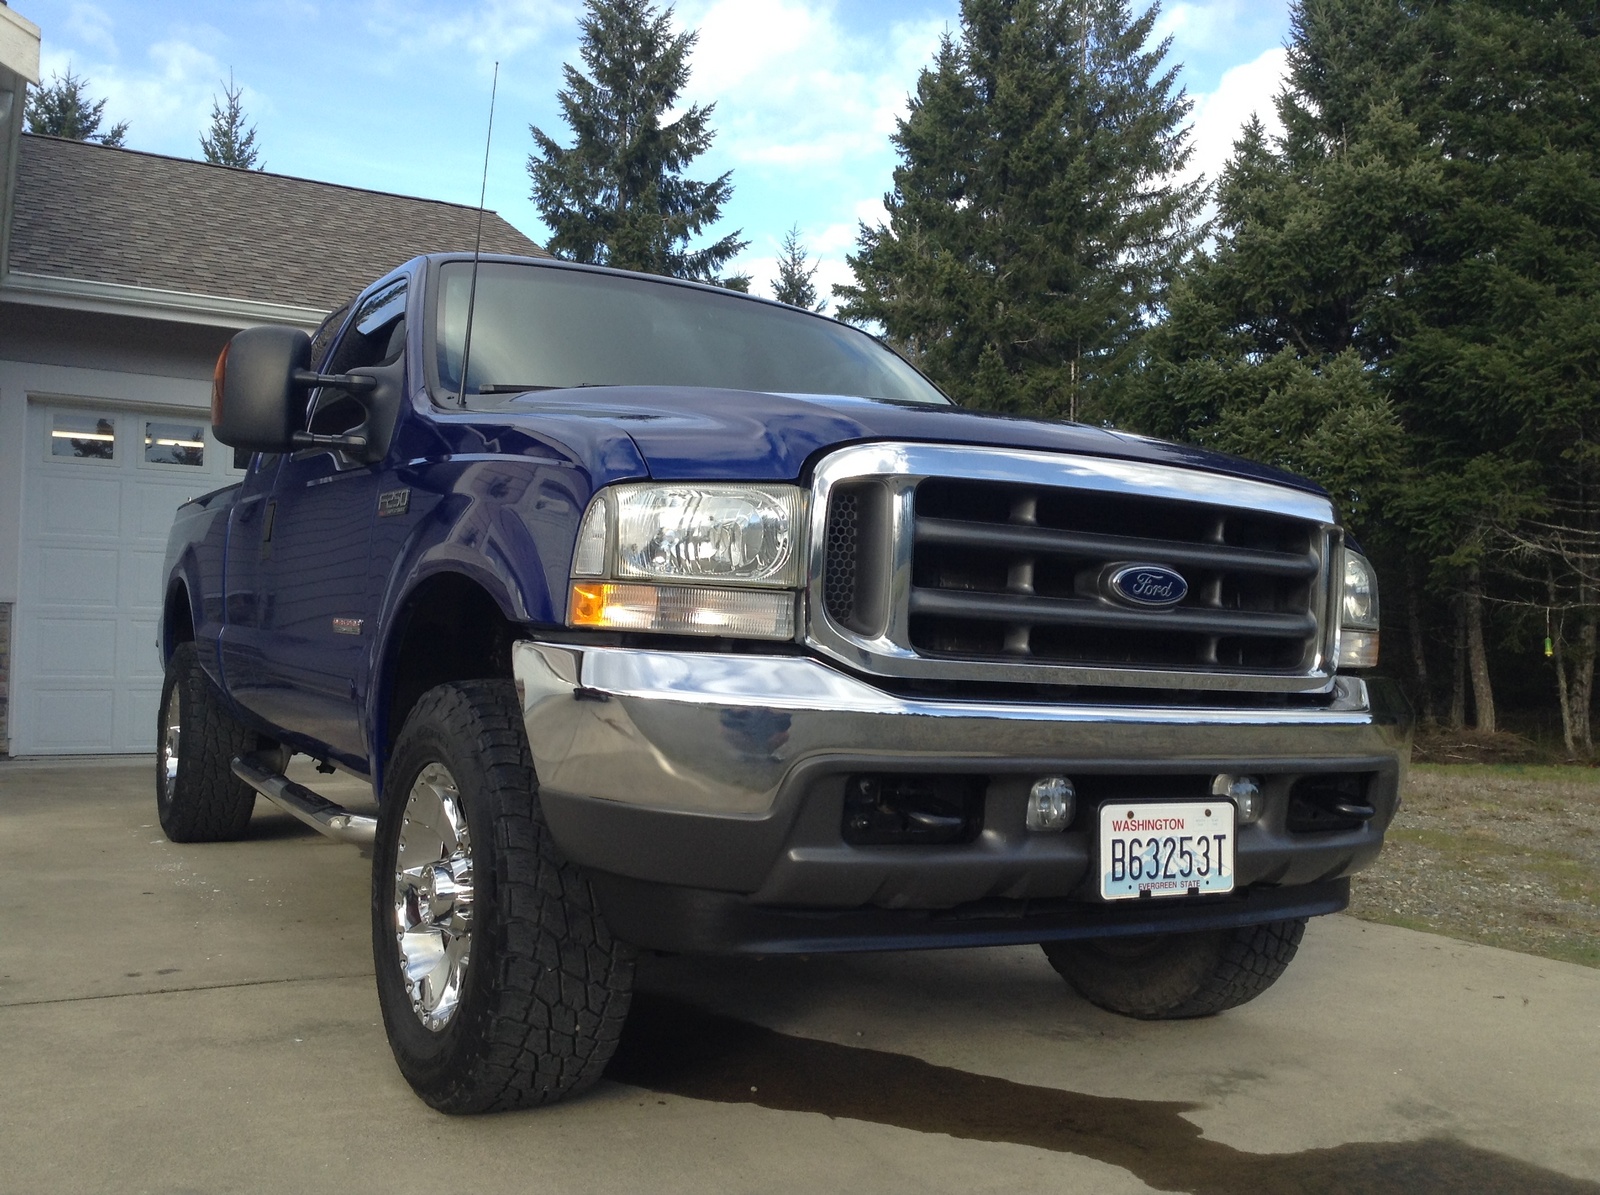 2003 Ford F-250 Super Duty - Pictures - CarGurus